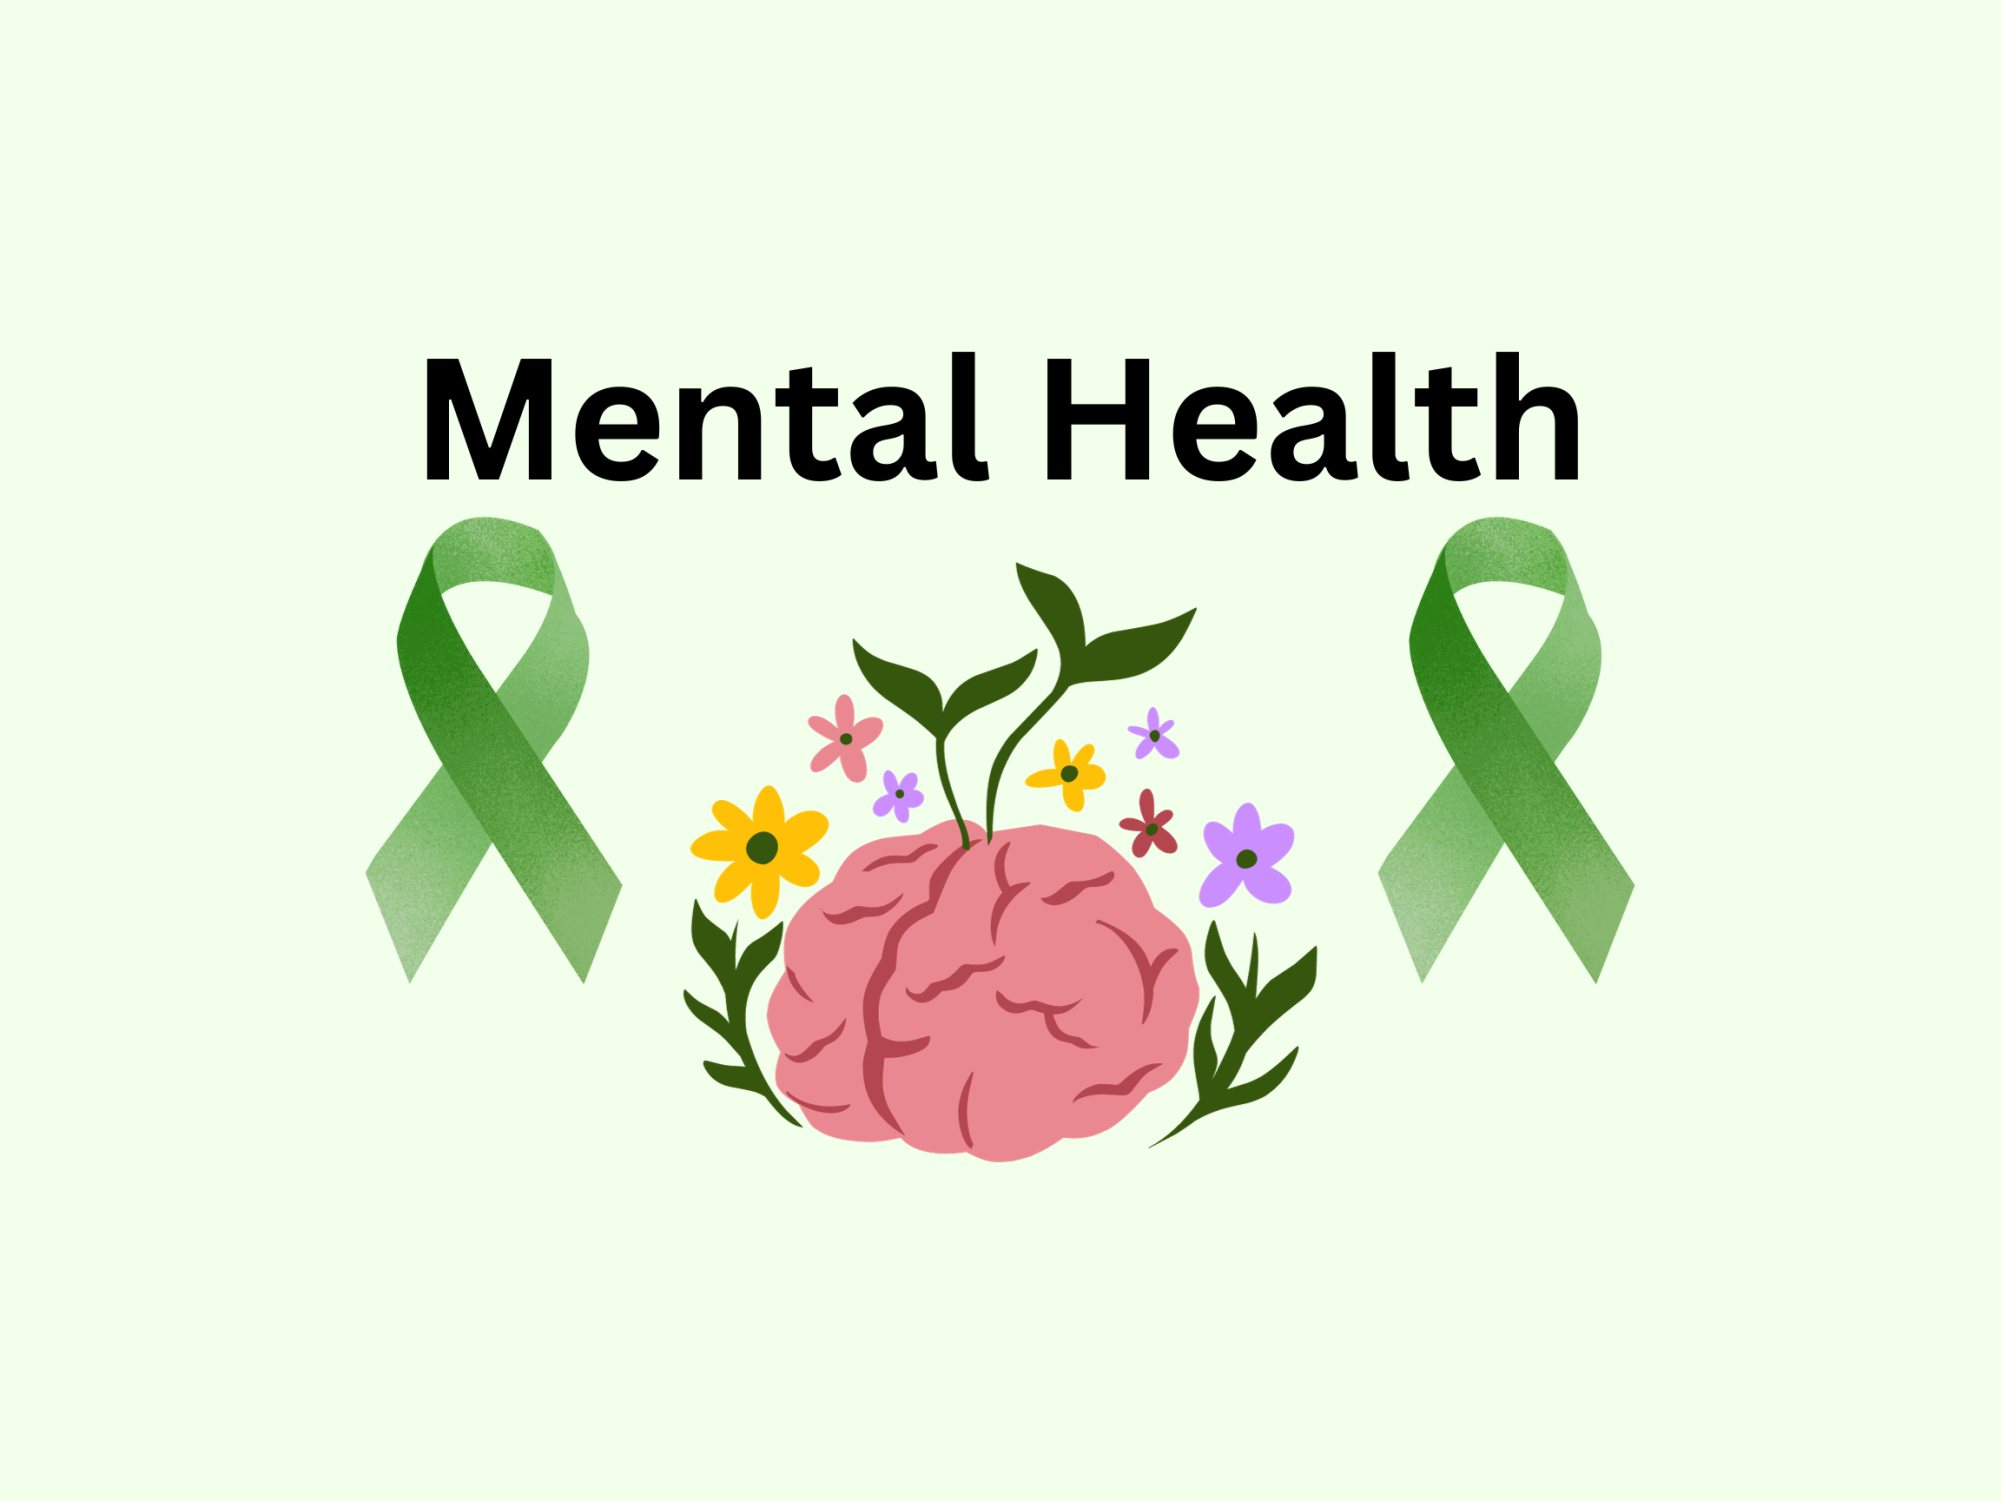 The green ribbon is a symbol for mental health awareness.